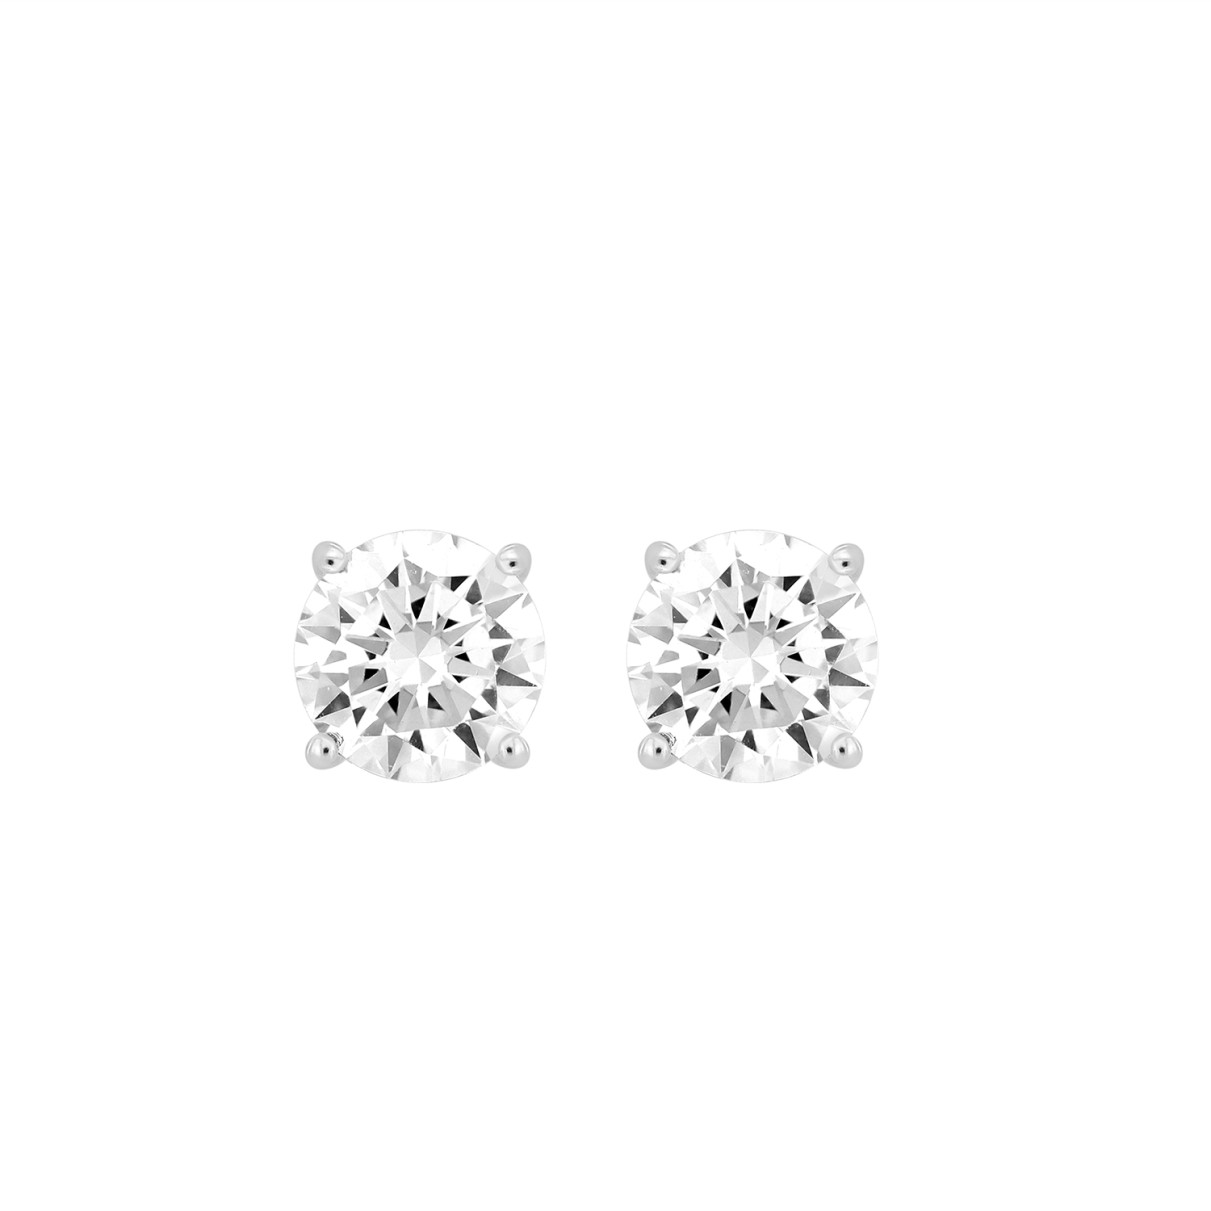 LADIES SOLITAIRE EARRINGS  4CT ROUND DIAMOND 14K WHITE GOLD